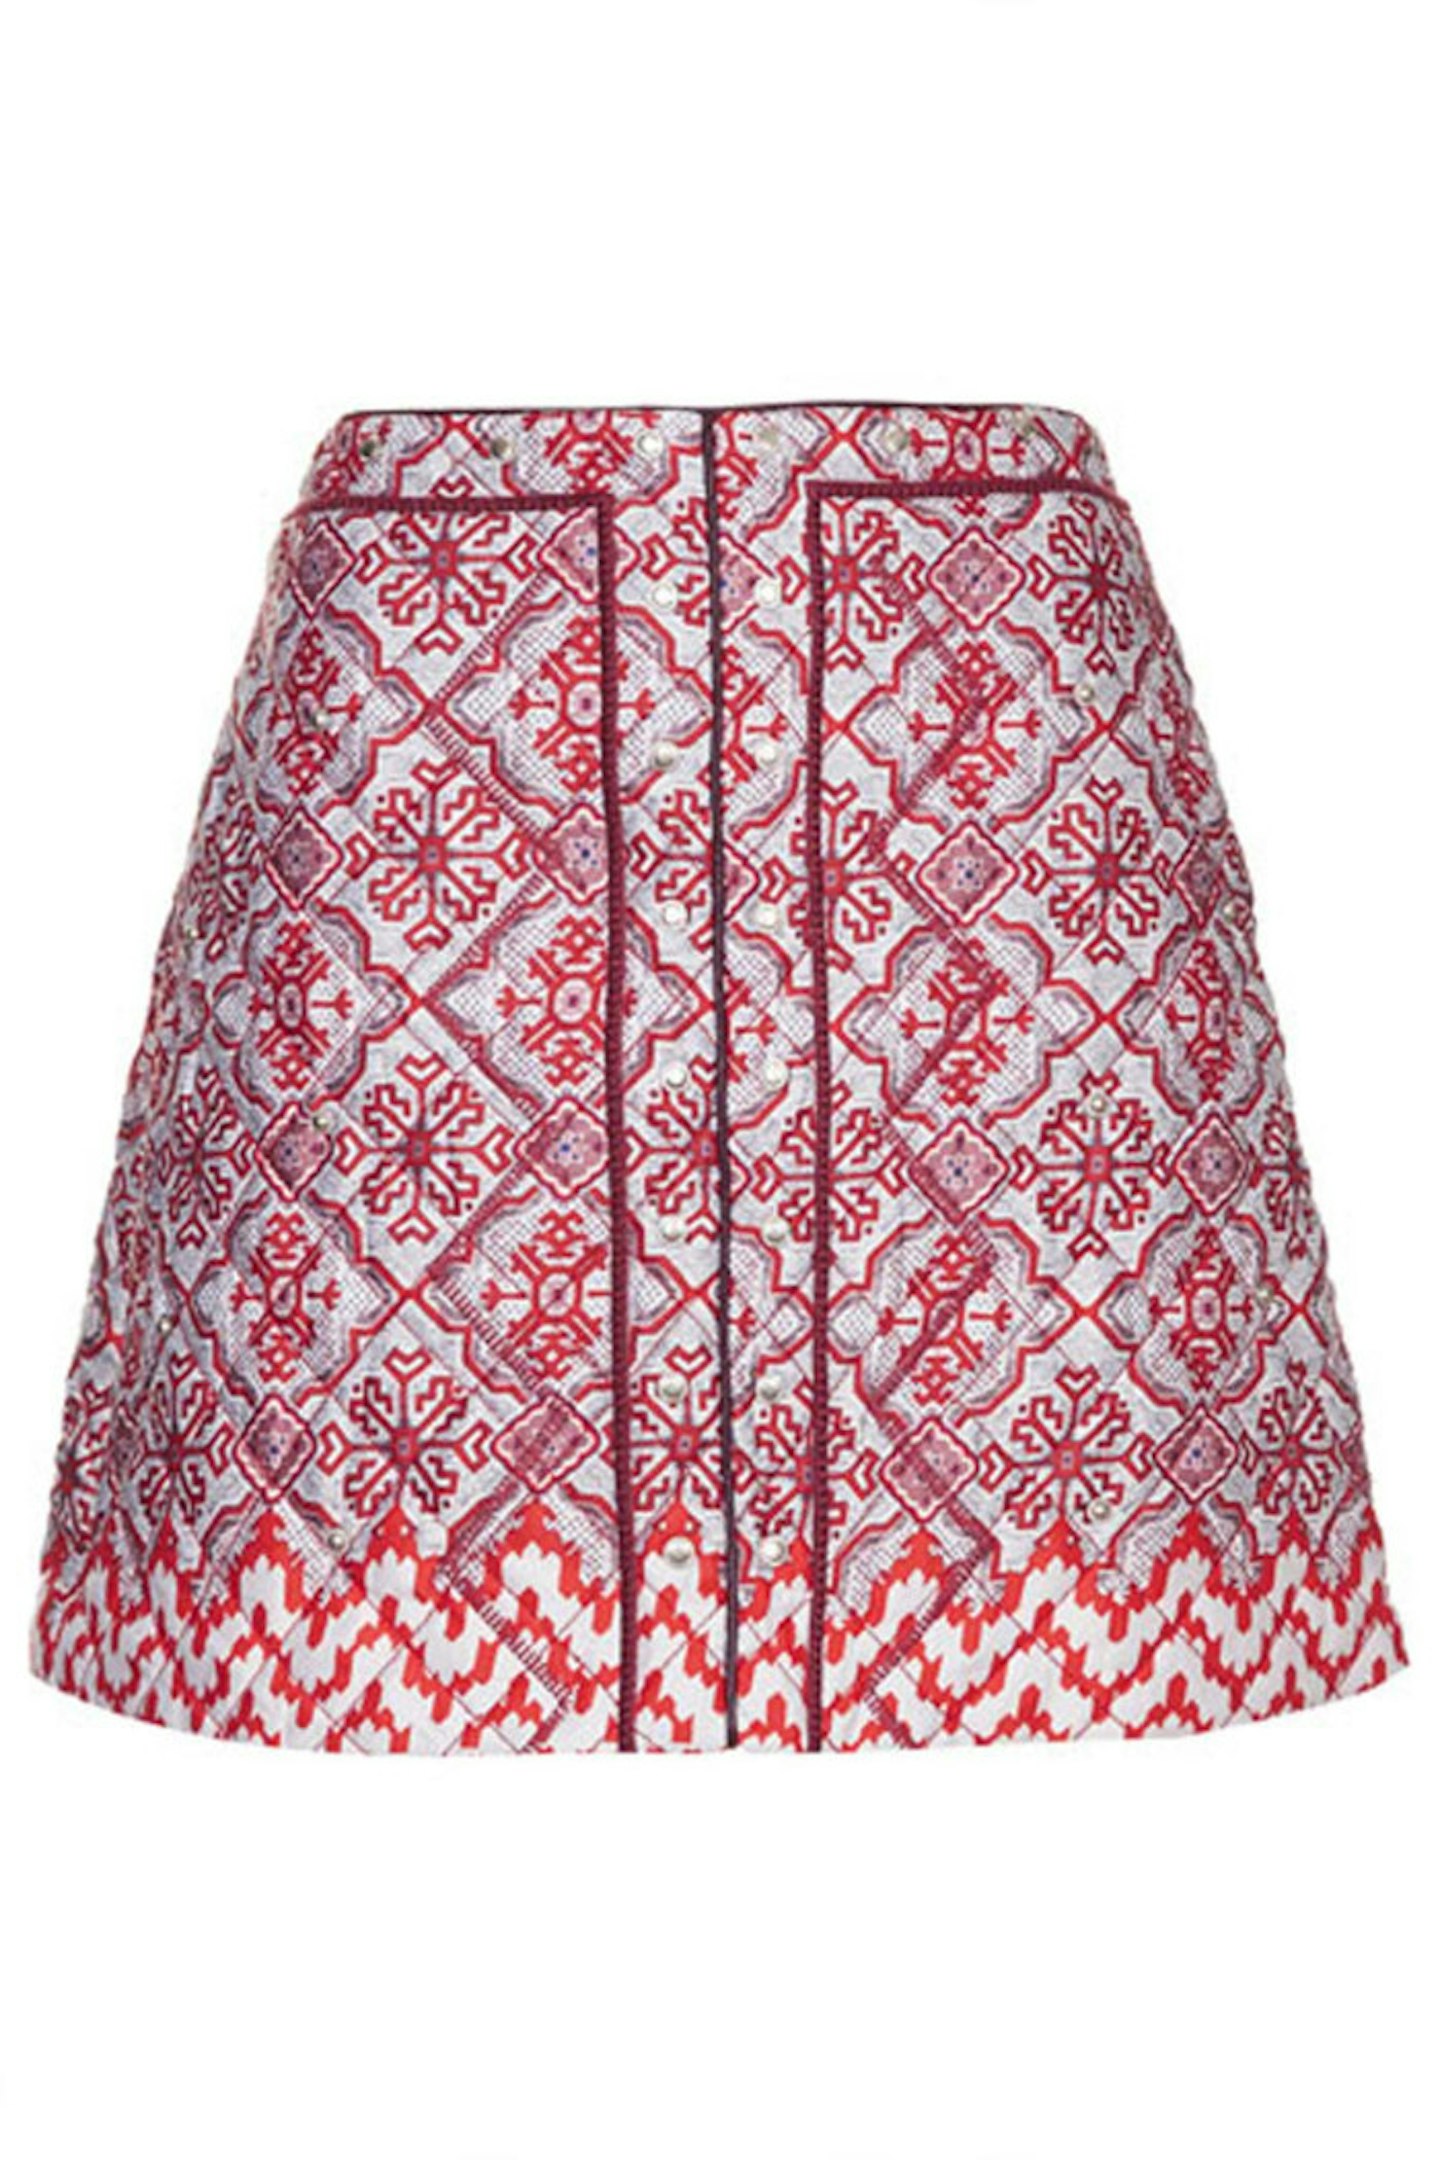 limited edition quilted print skirt, £48, Topshop.com